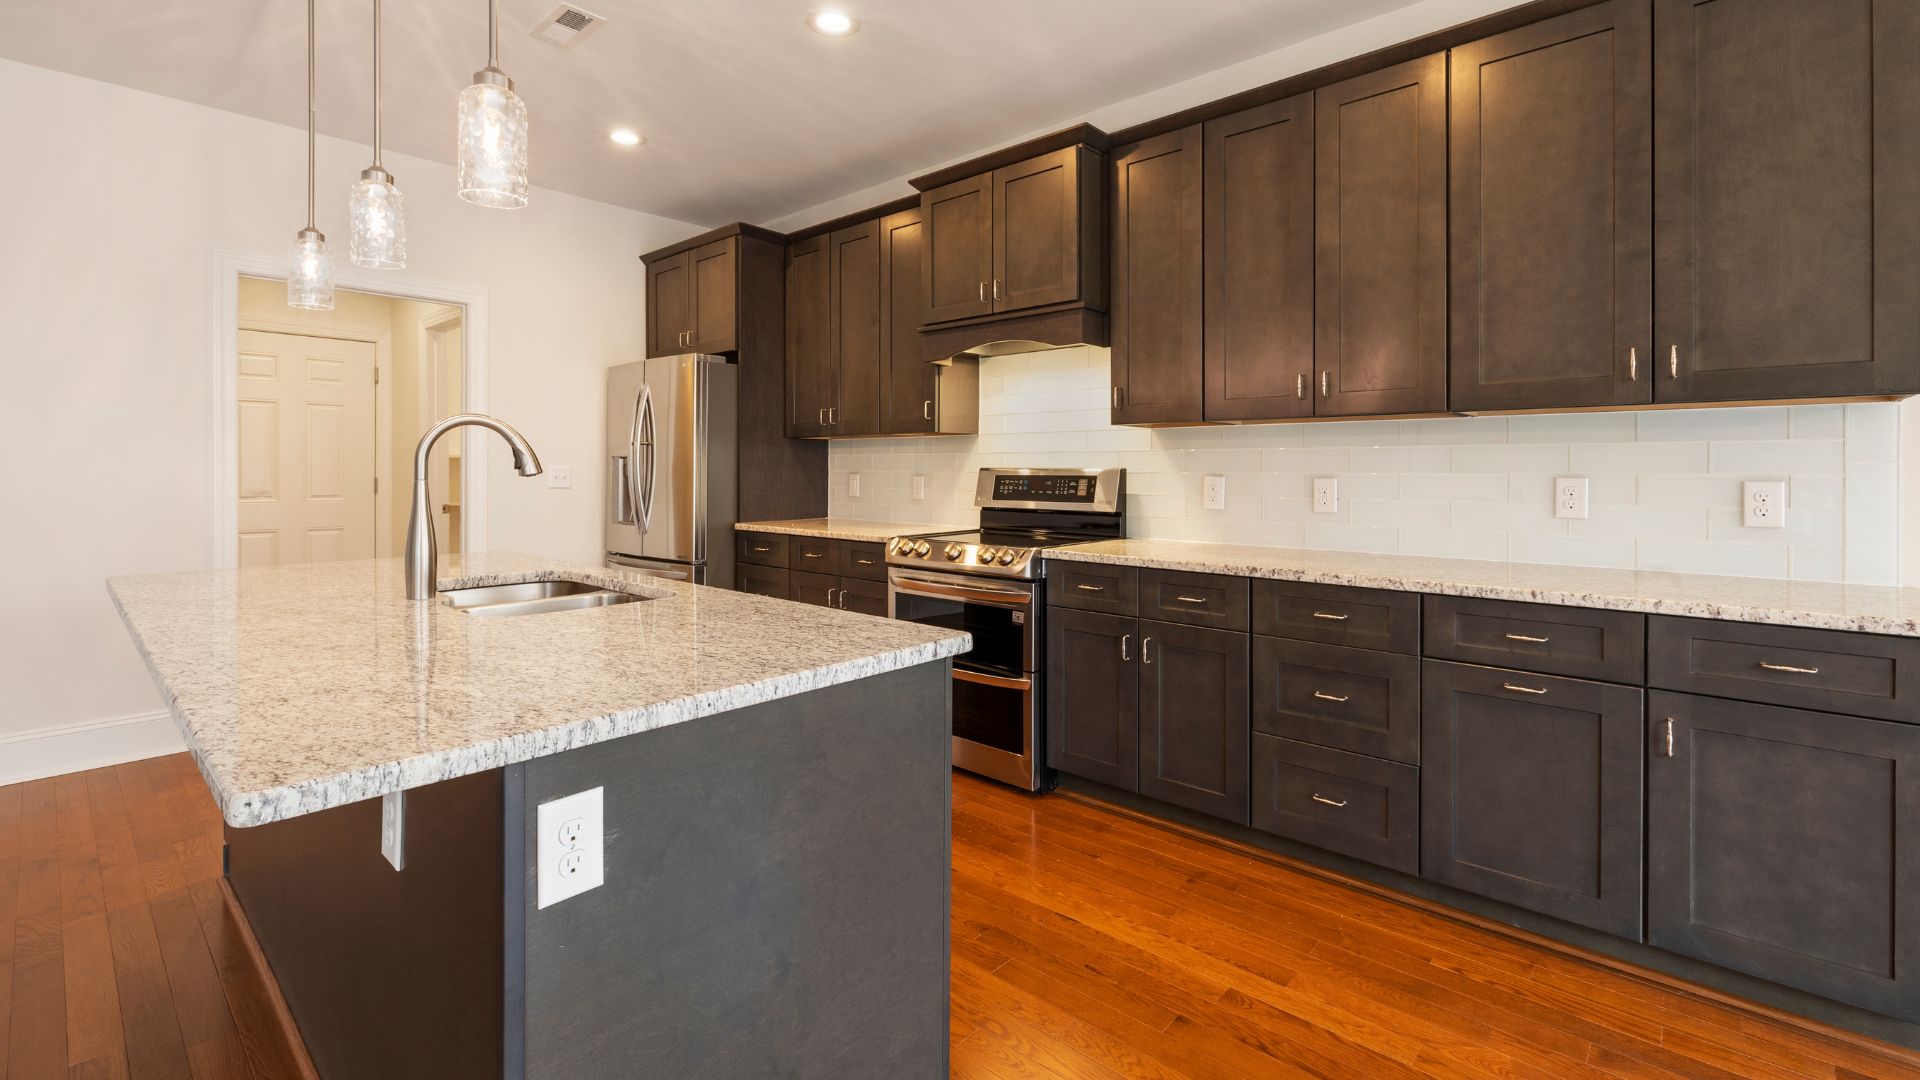 Dark brown Wall kitchen cabinets with white countertop and maple flooring